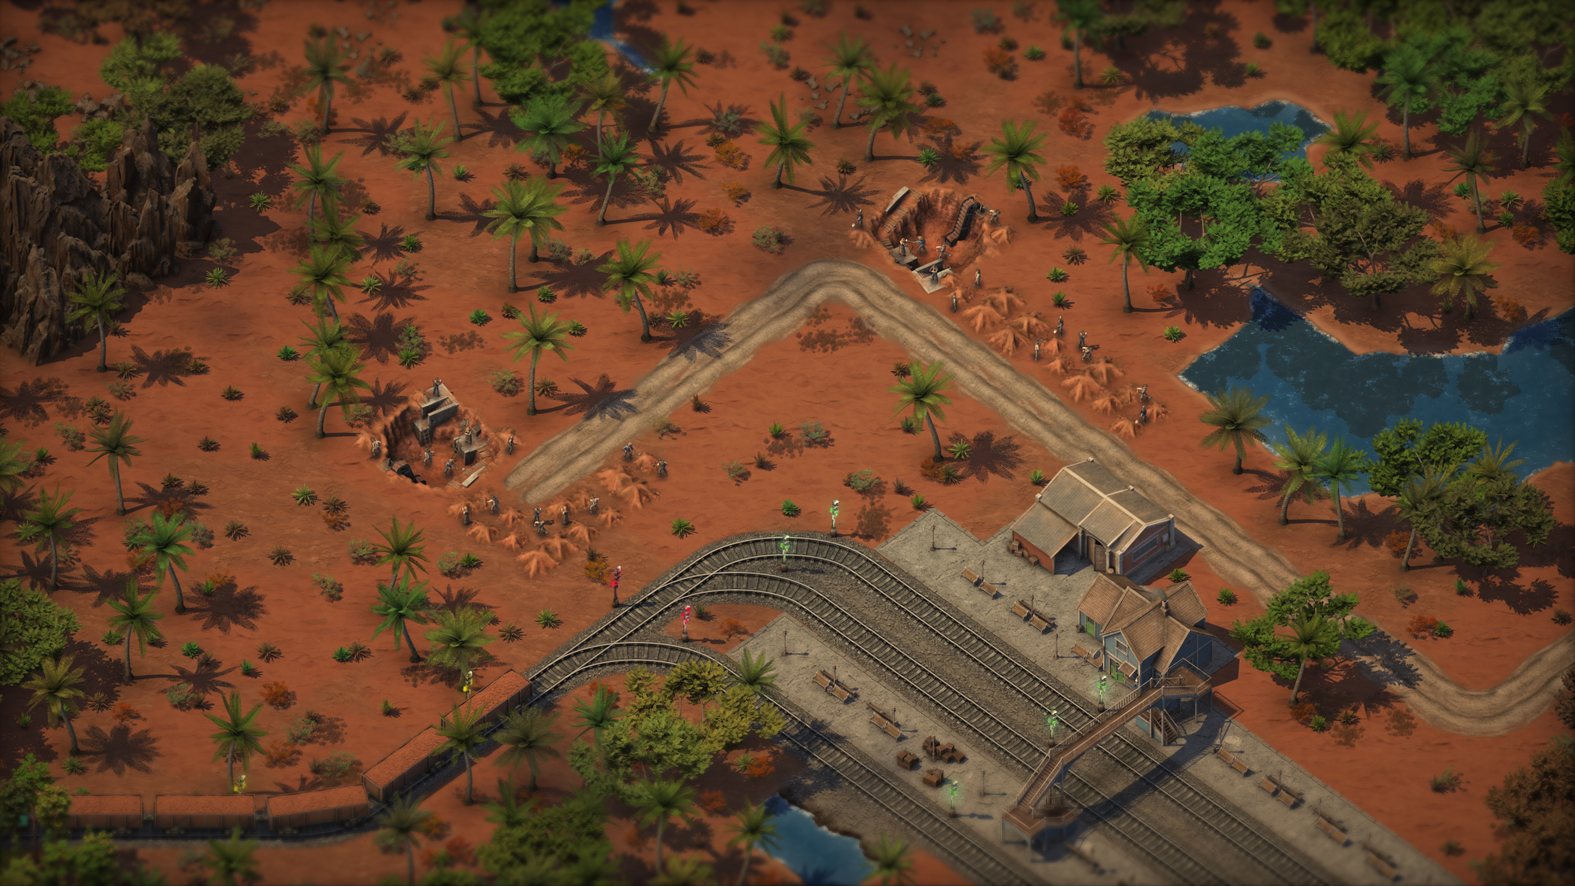 Train station in the middle of a barren desert. With a small amount of dig sites, possibly for resource management